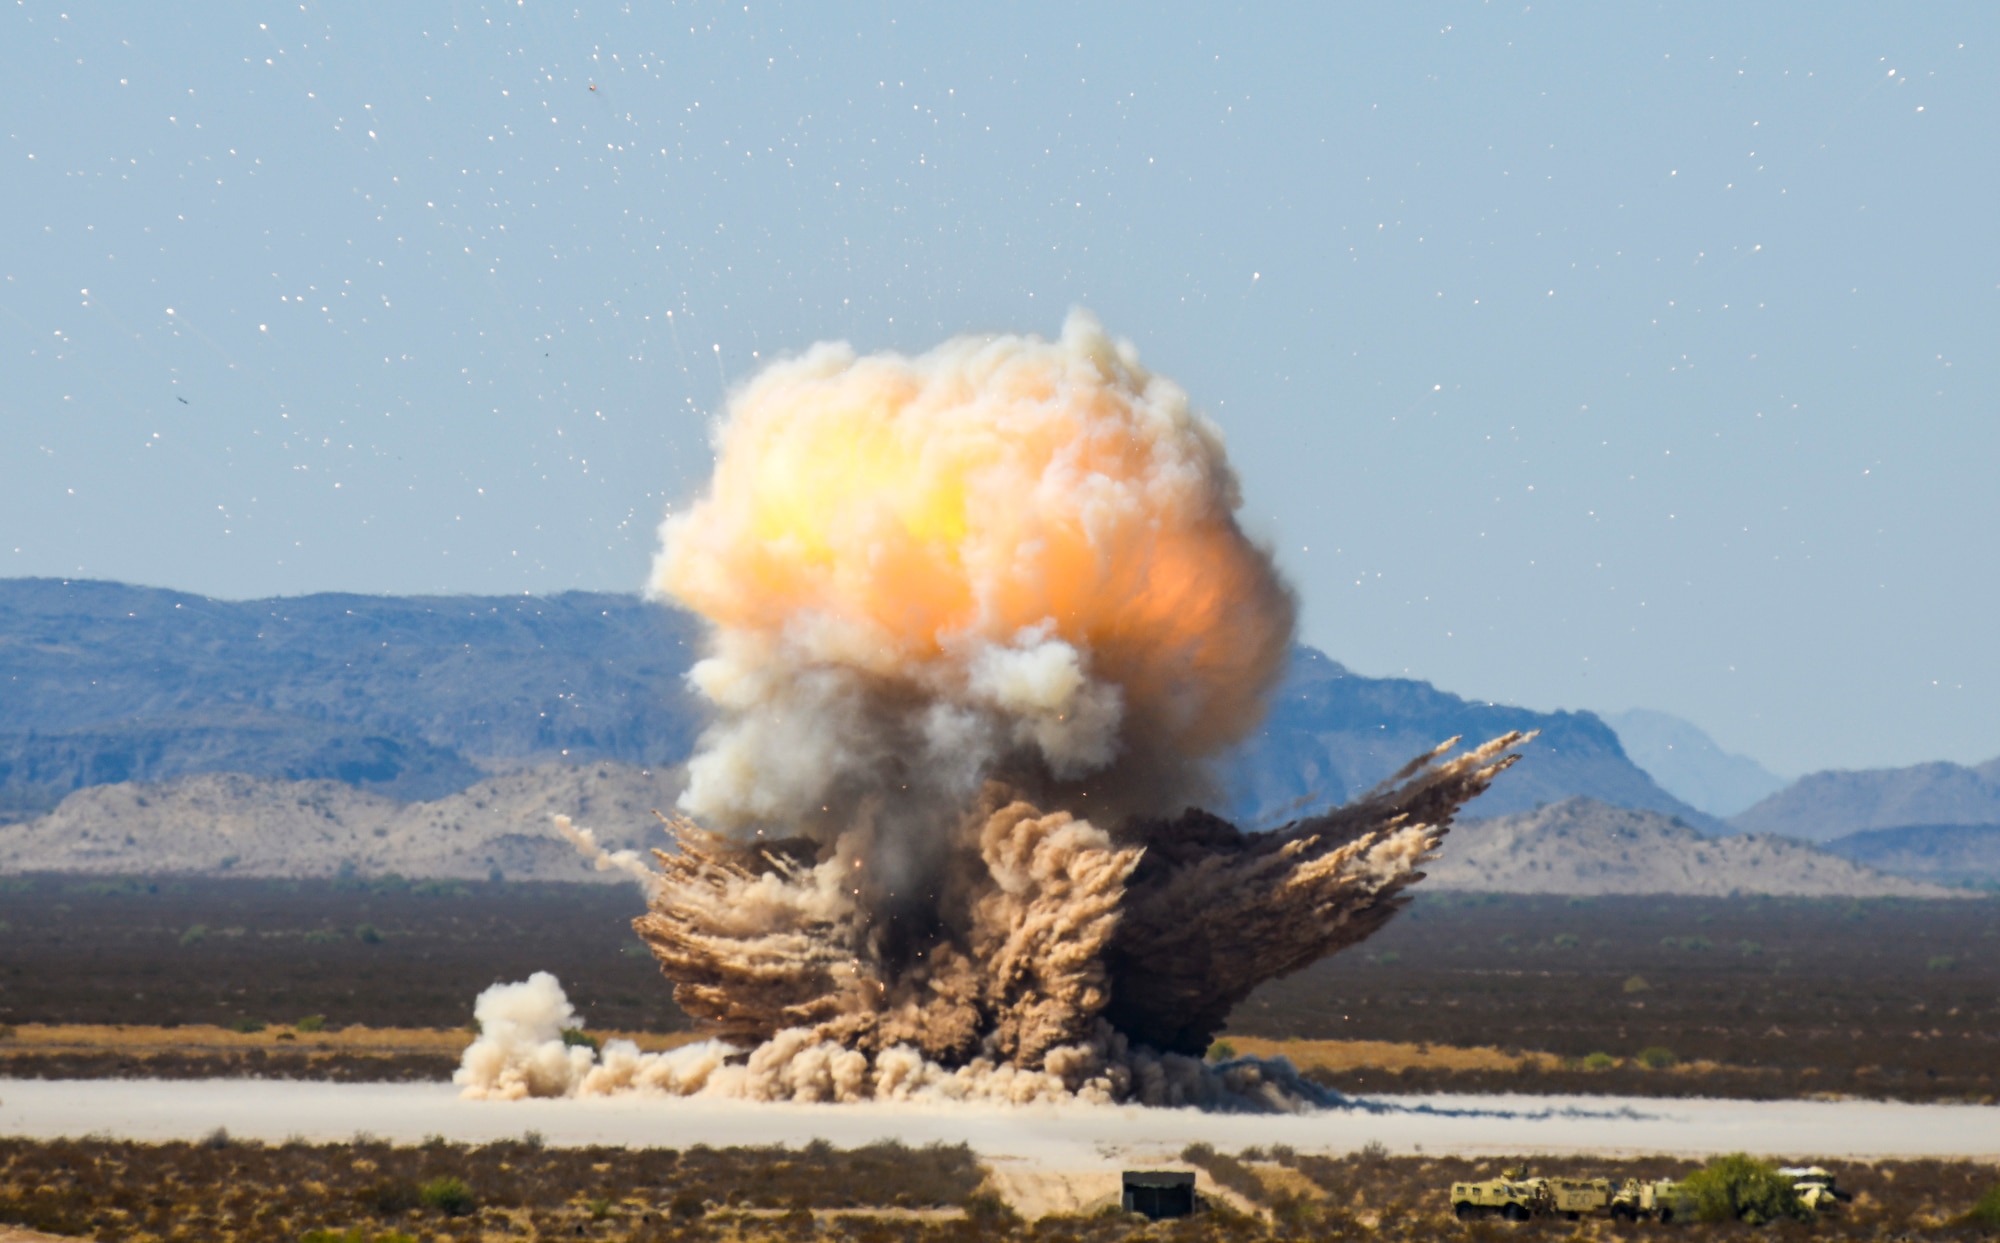 A rocket motor, filled with carboxyl-terminated polybutadiene (CTPB), is detonated during a demolition operation Sept. 12, 2019, at the Barry M. Goldwater Range near Gila Bend, Ariz.